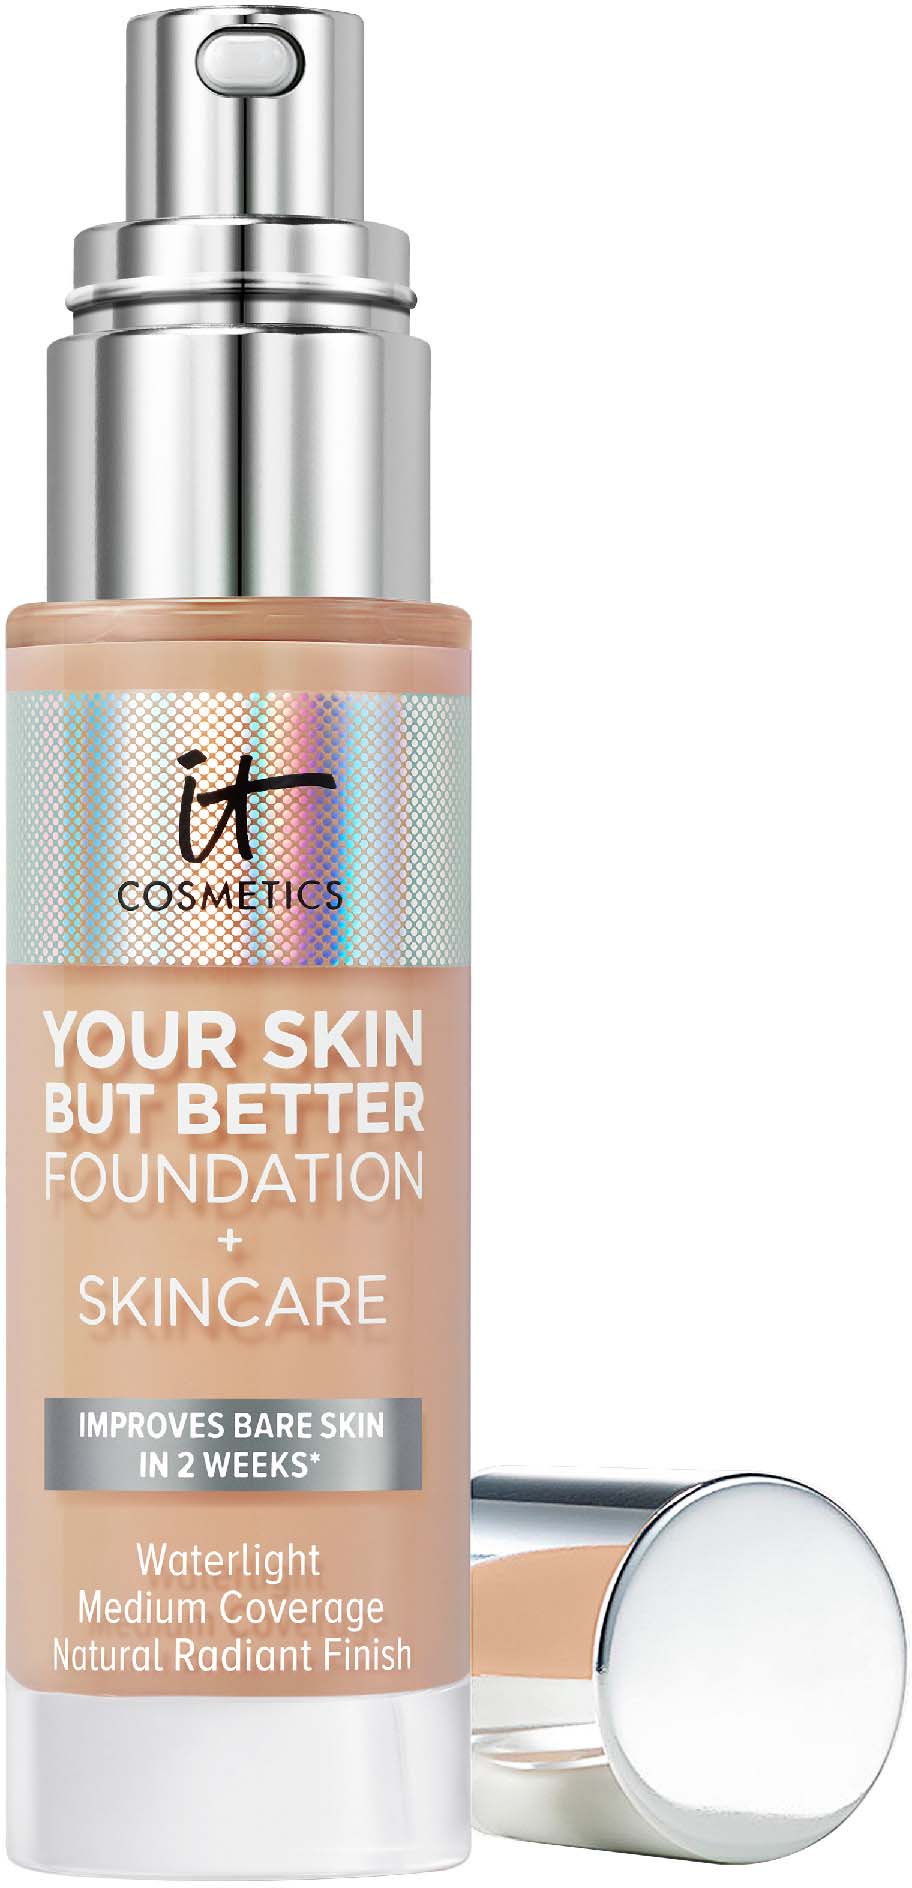 It Cosmetics Your Skin But Better Foundation + Skincare - Rich Neutral 53